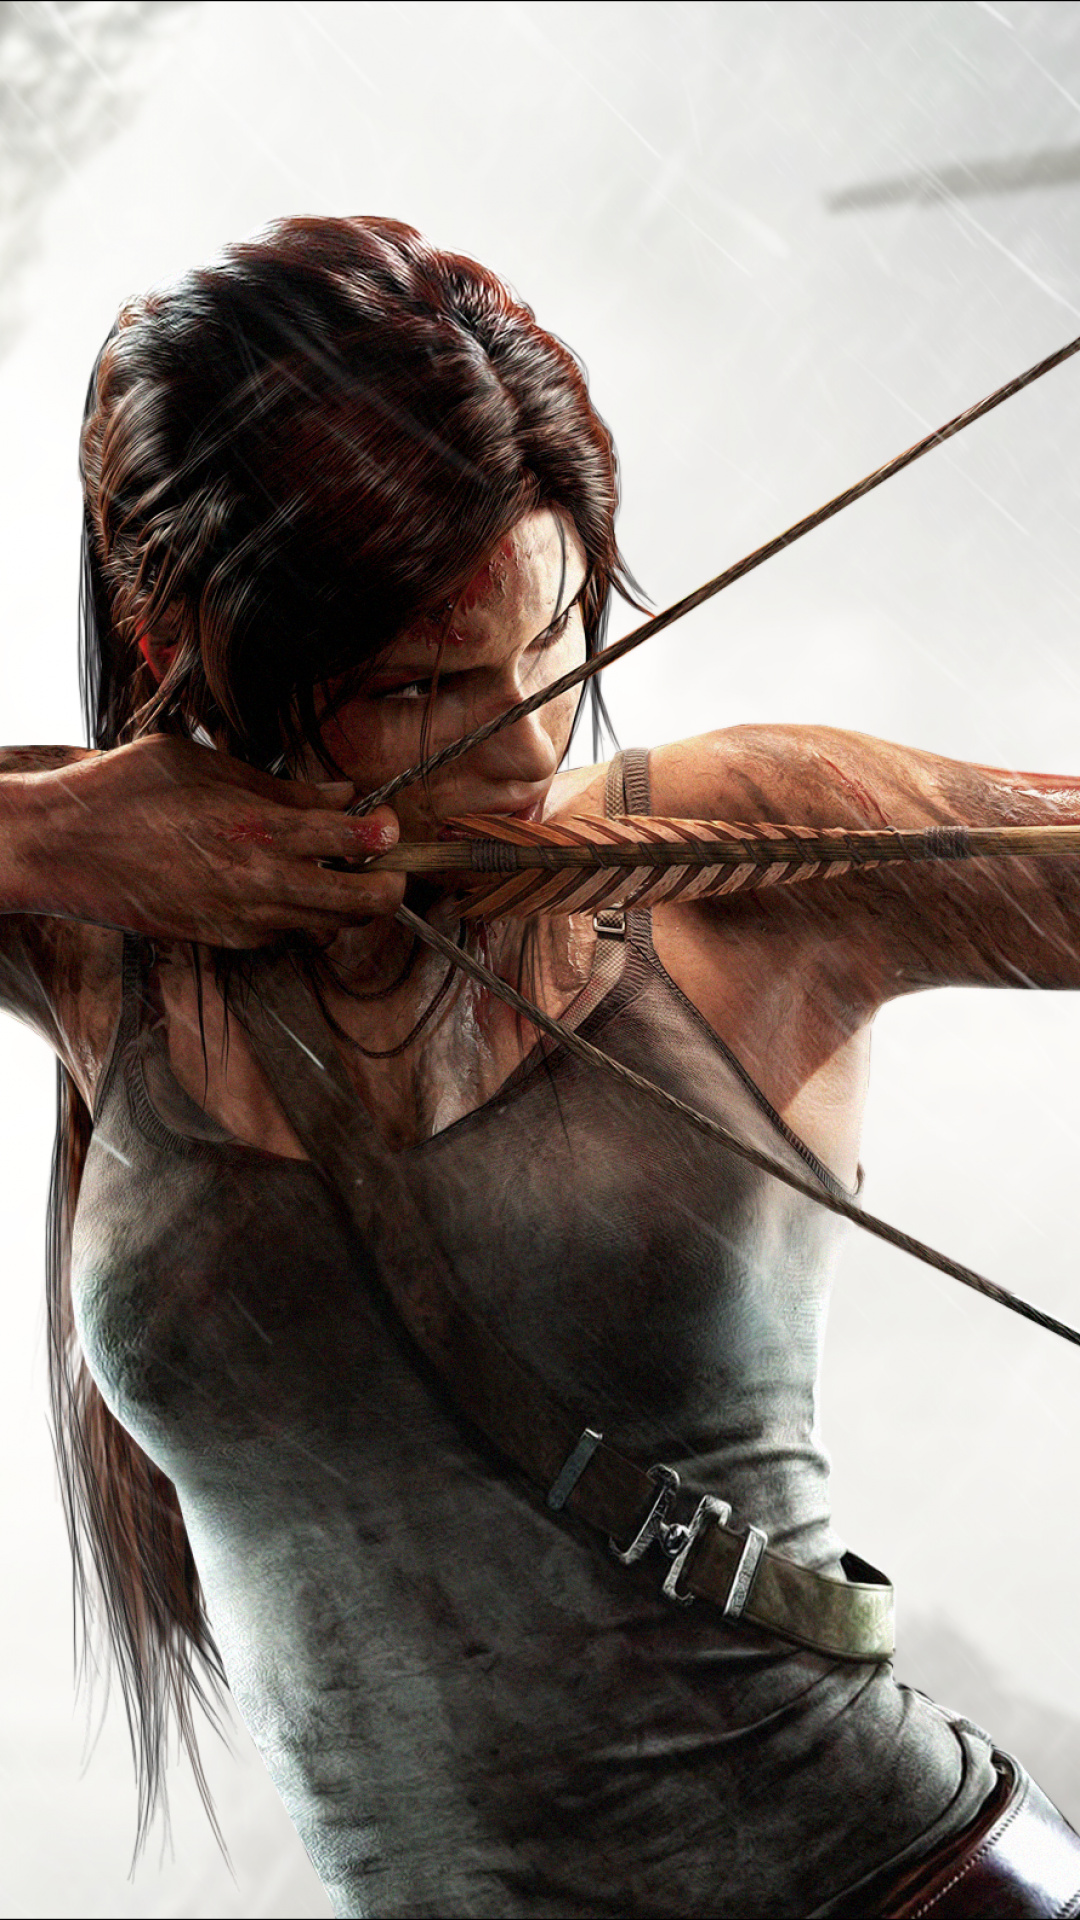 Tomb Raider phone wallpapers, Top phone backgrounds, Gaming on the go, 1080x1920 Full HD Handy